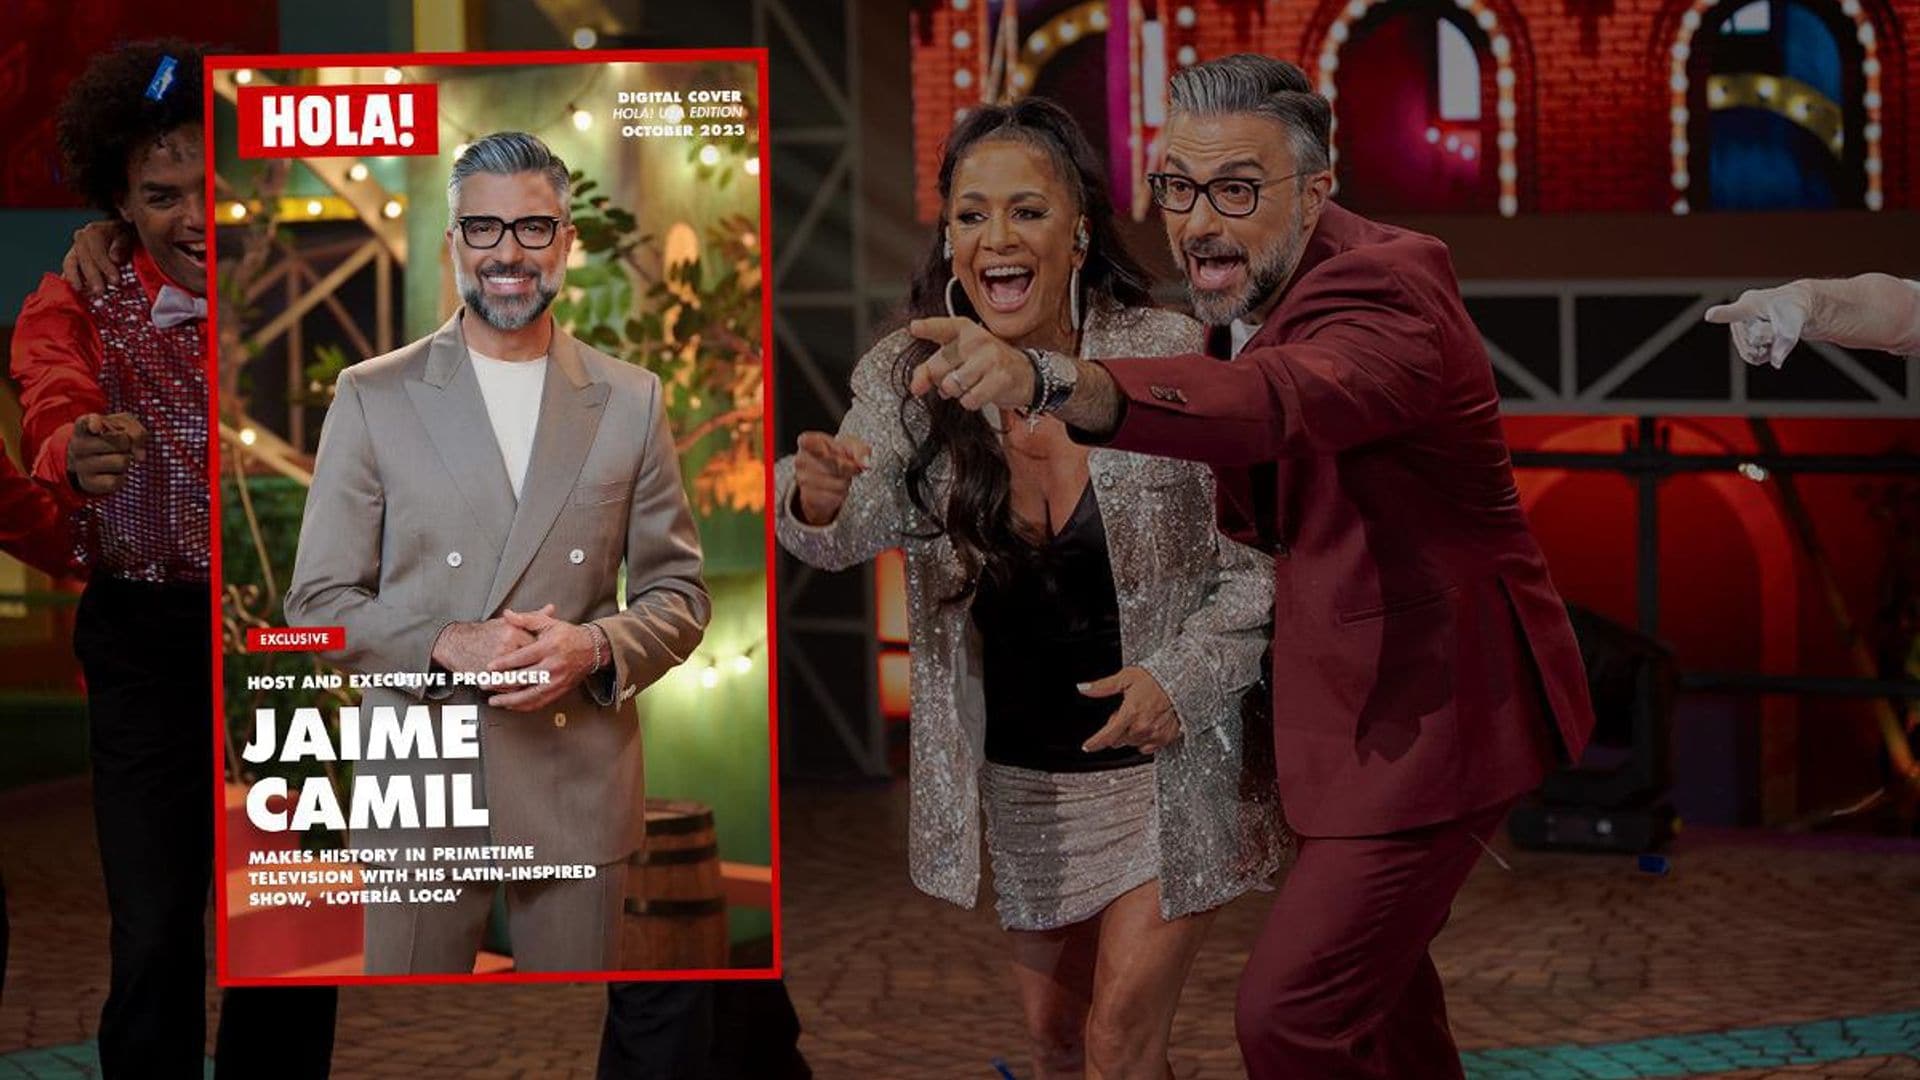 Jaime Camil makes history in primetime television with his Latin-inspired show